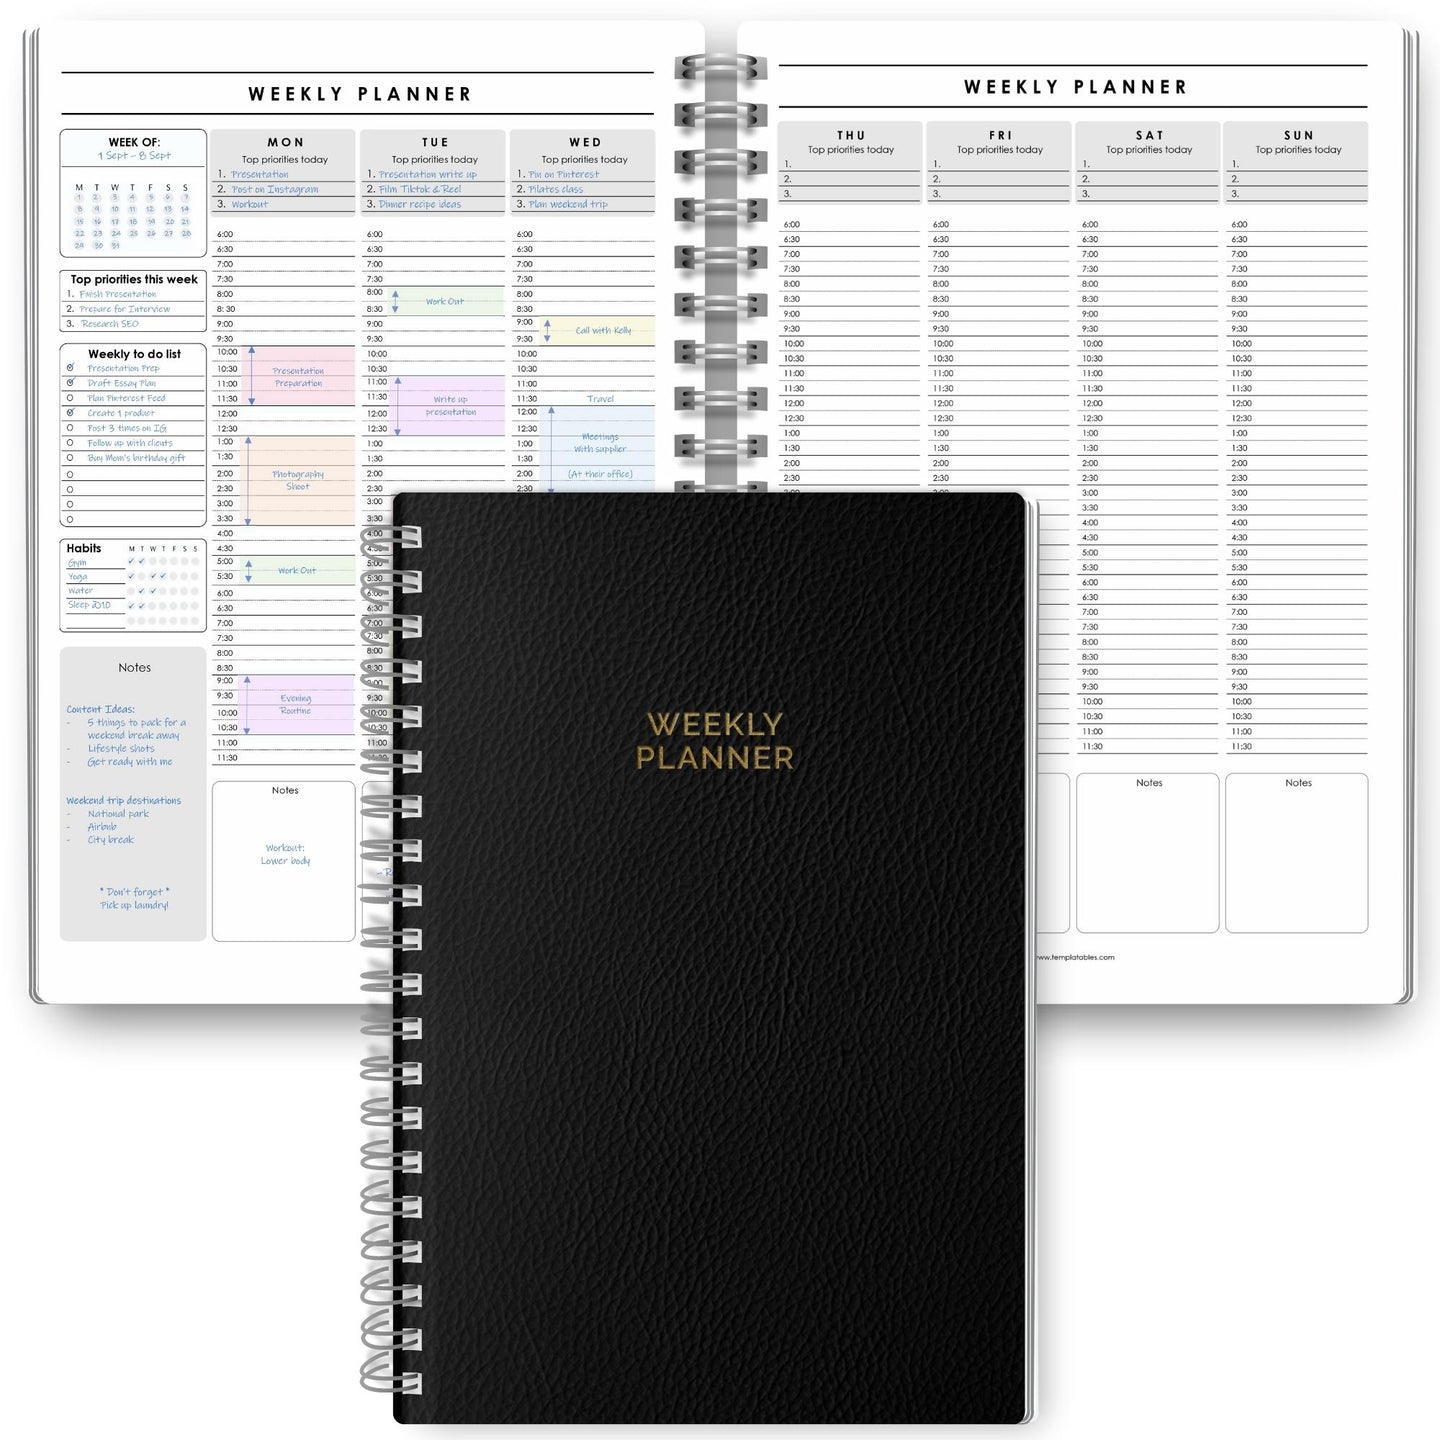 Weekly & Hourly Planner Organizer | Weekly Schedule, To Do List, Productivity Planner & Time Management | A5 Mono